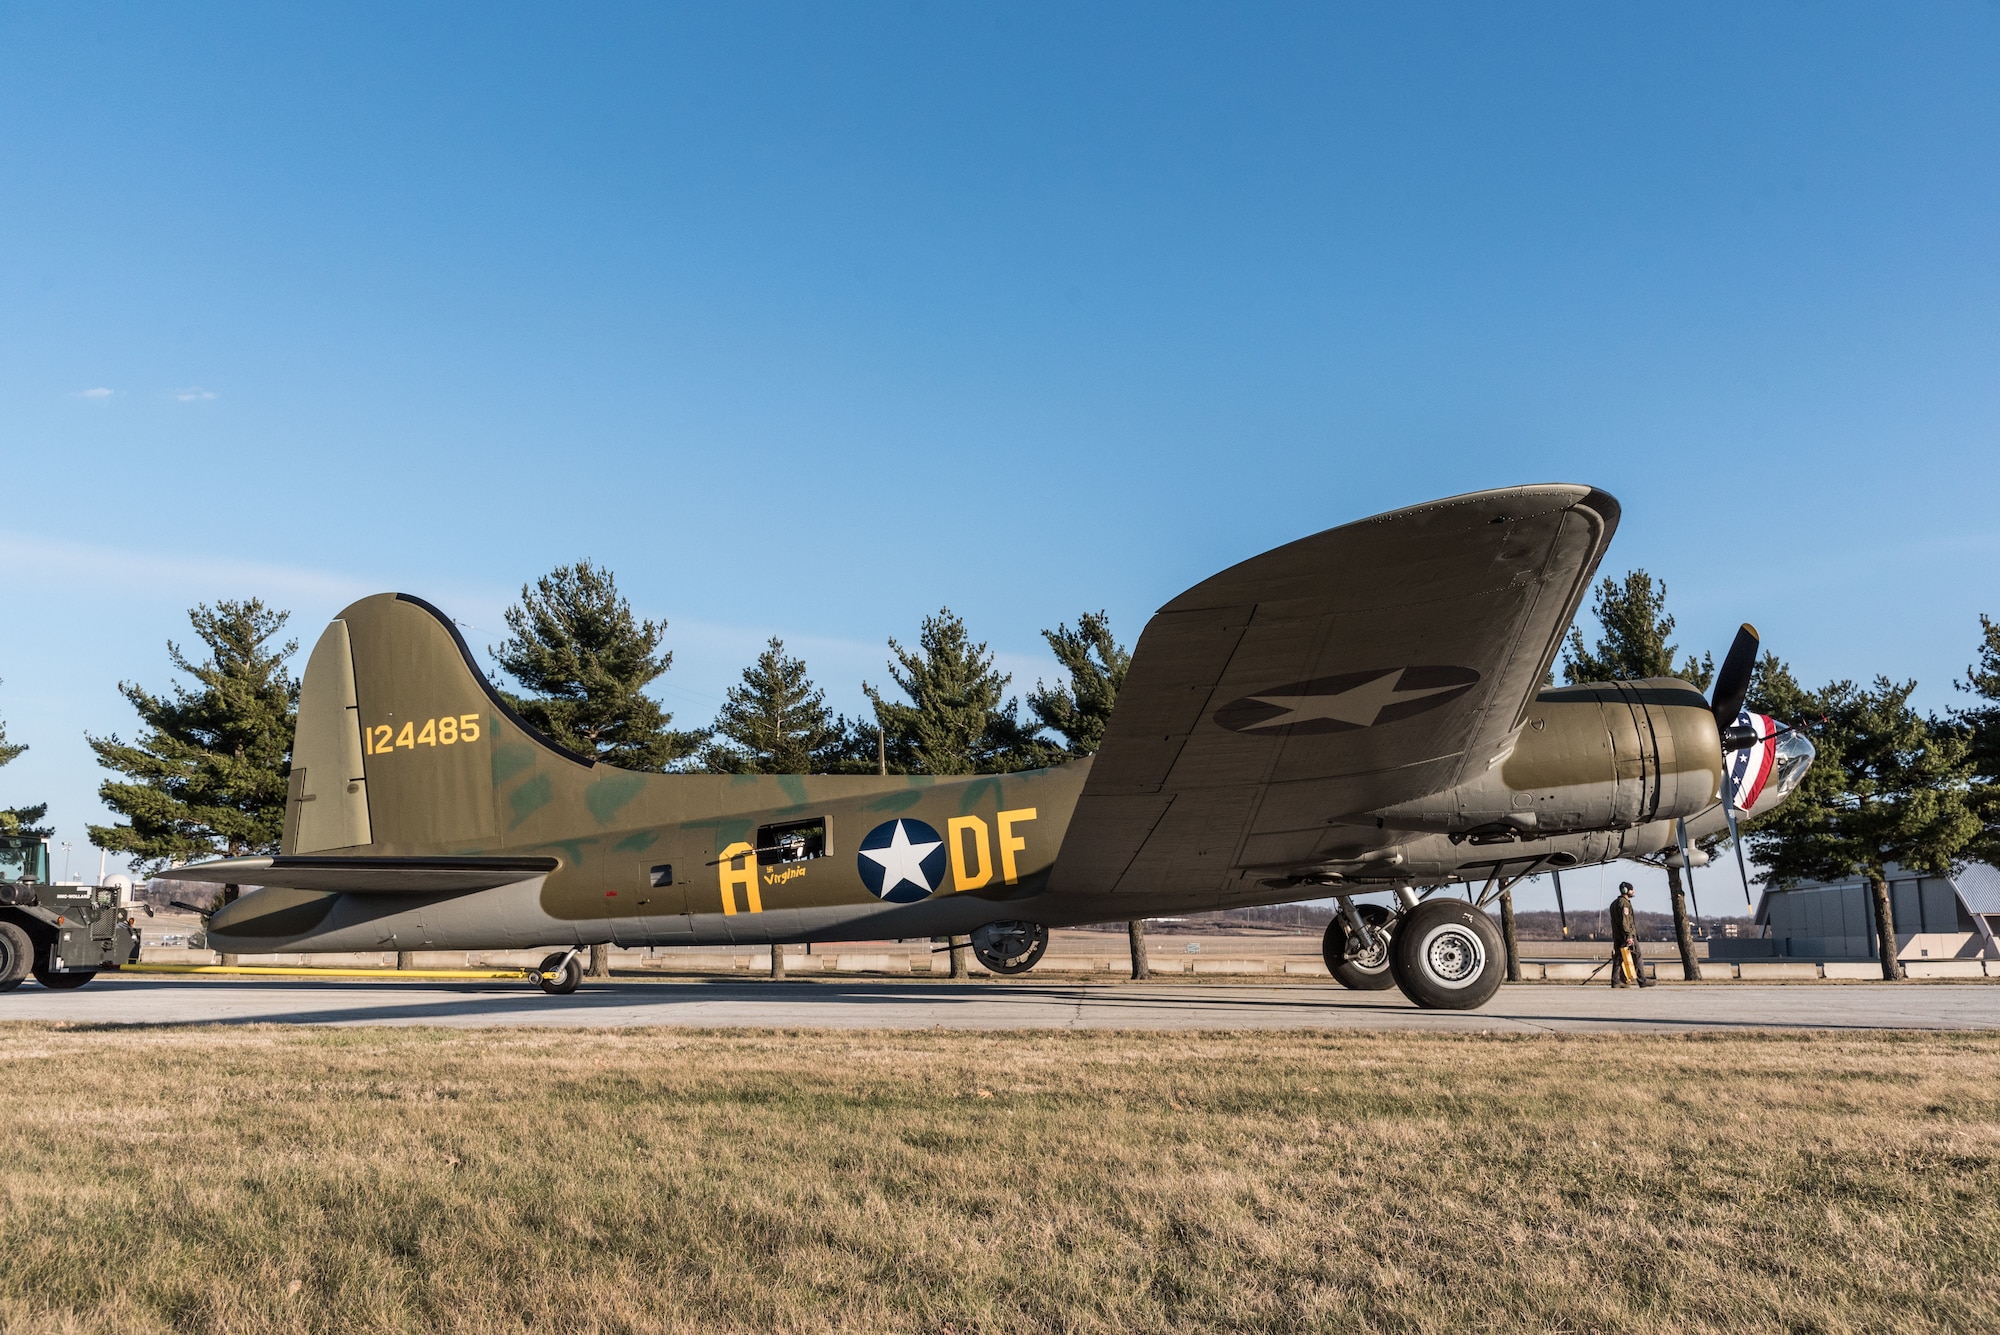 (03/14/2018) -- The B-17F Memphis Belle moves along the tow path on the way to the WWII Gallery at the National Museum of the United States Air Force on March 14, 2018. Plans call for the aircraft to be placed on permanent public display in the WWII Gallery here at the National Museum of the U.S. Air Force on May 17, 2018. (U.S. Air Force photo by Kevin Lush)